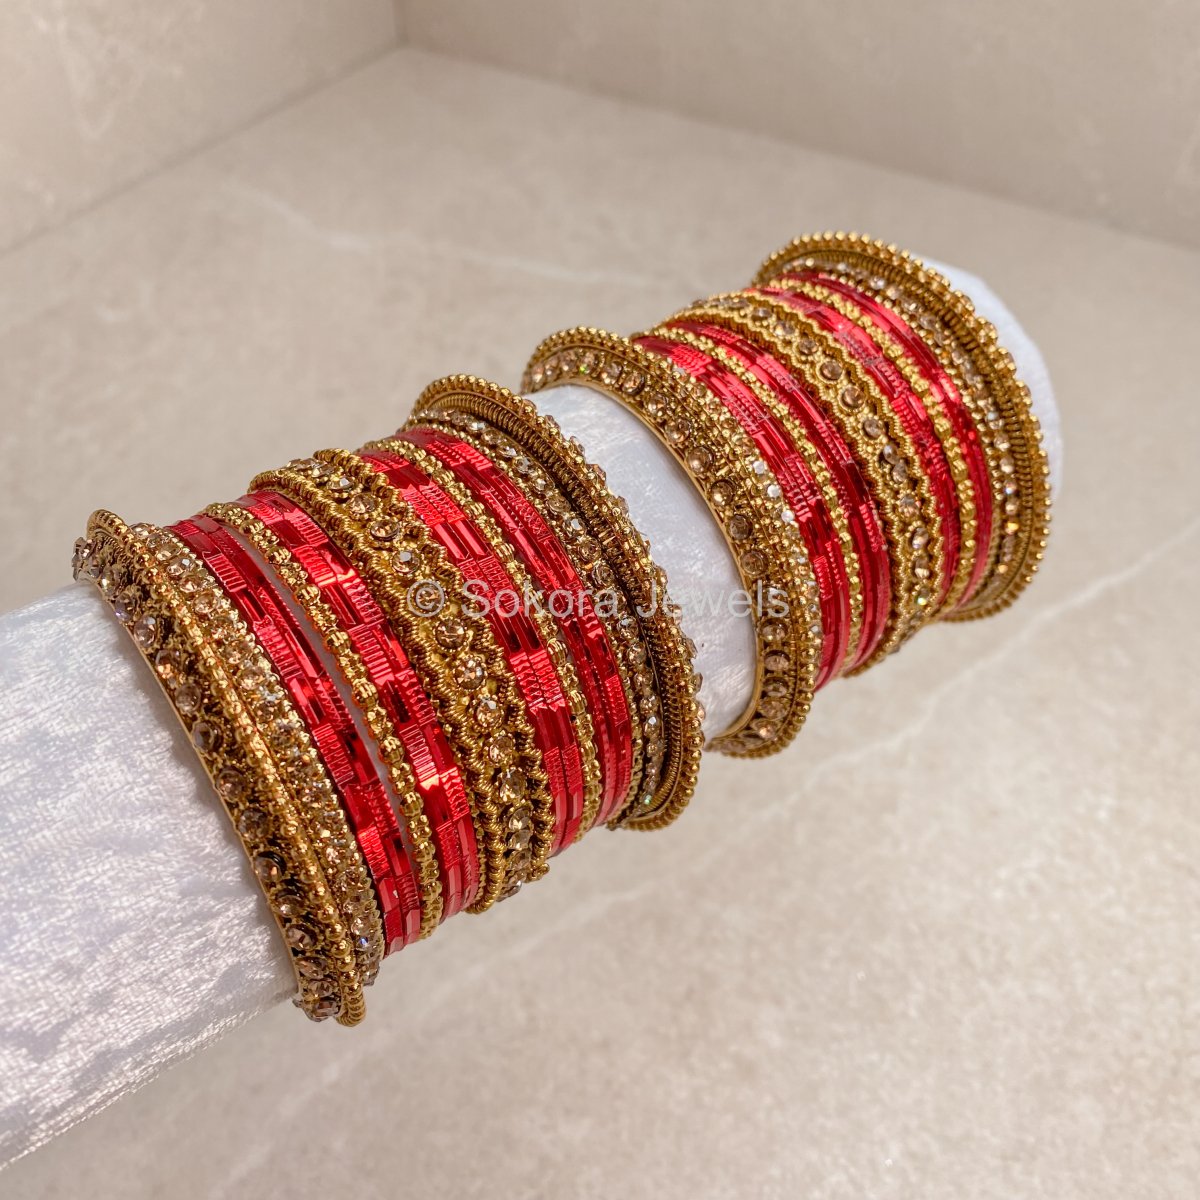 (Slightly less than perfect) 2 x Clearance Bangle Set- 2.4 - SOKORA JEWELS(Slightly less than perfect) 2 x Clearance Bangle Set- 2.4BANGLES